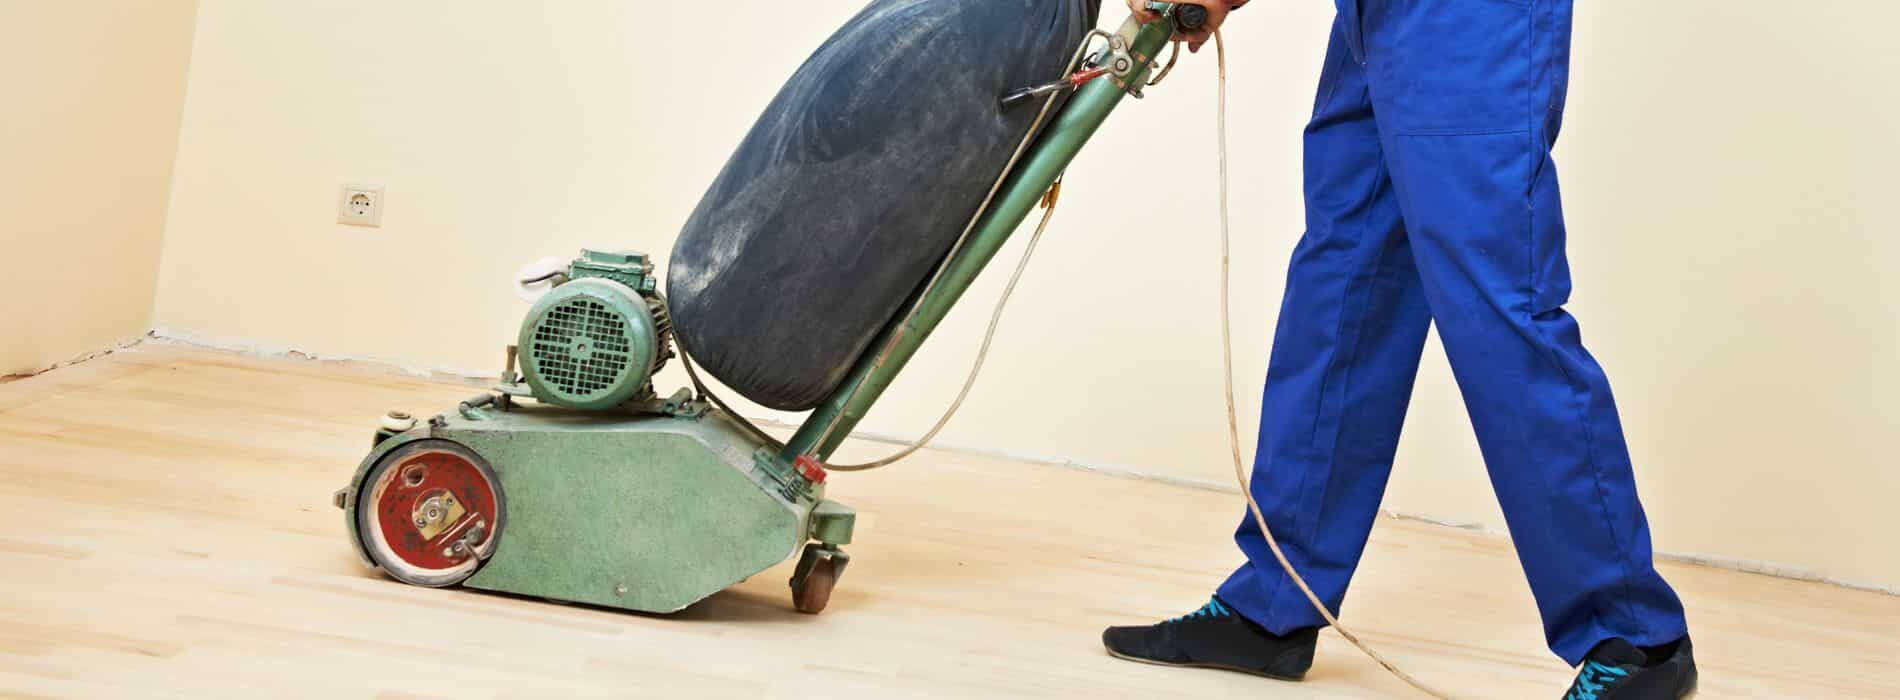 Bona Scorpion drum sander, a professional floor sanding machine with 200 mm dimensions, 1.5 kW power, and 240 V voltage. Operates at 50 Hz frequency, connected to a dust extraction system with HEPA filter for clean and efficient sanding results.